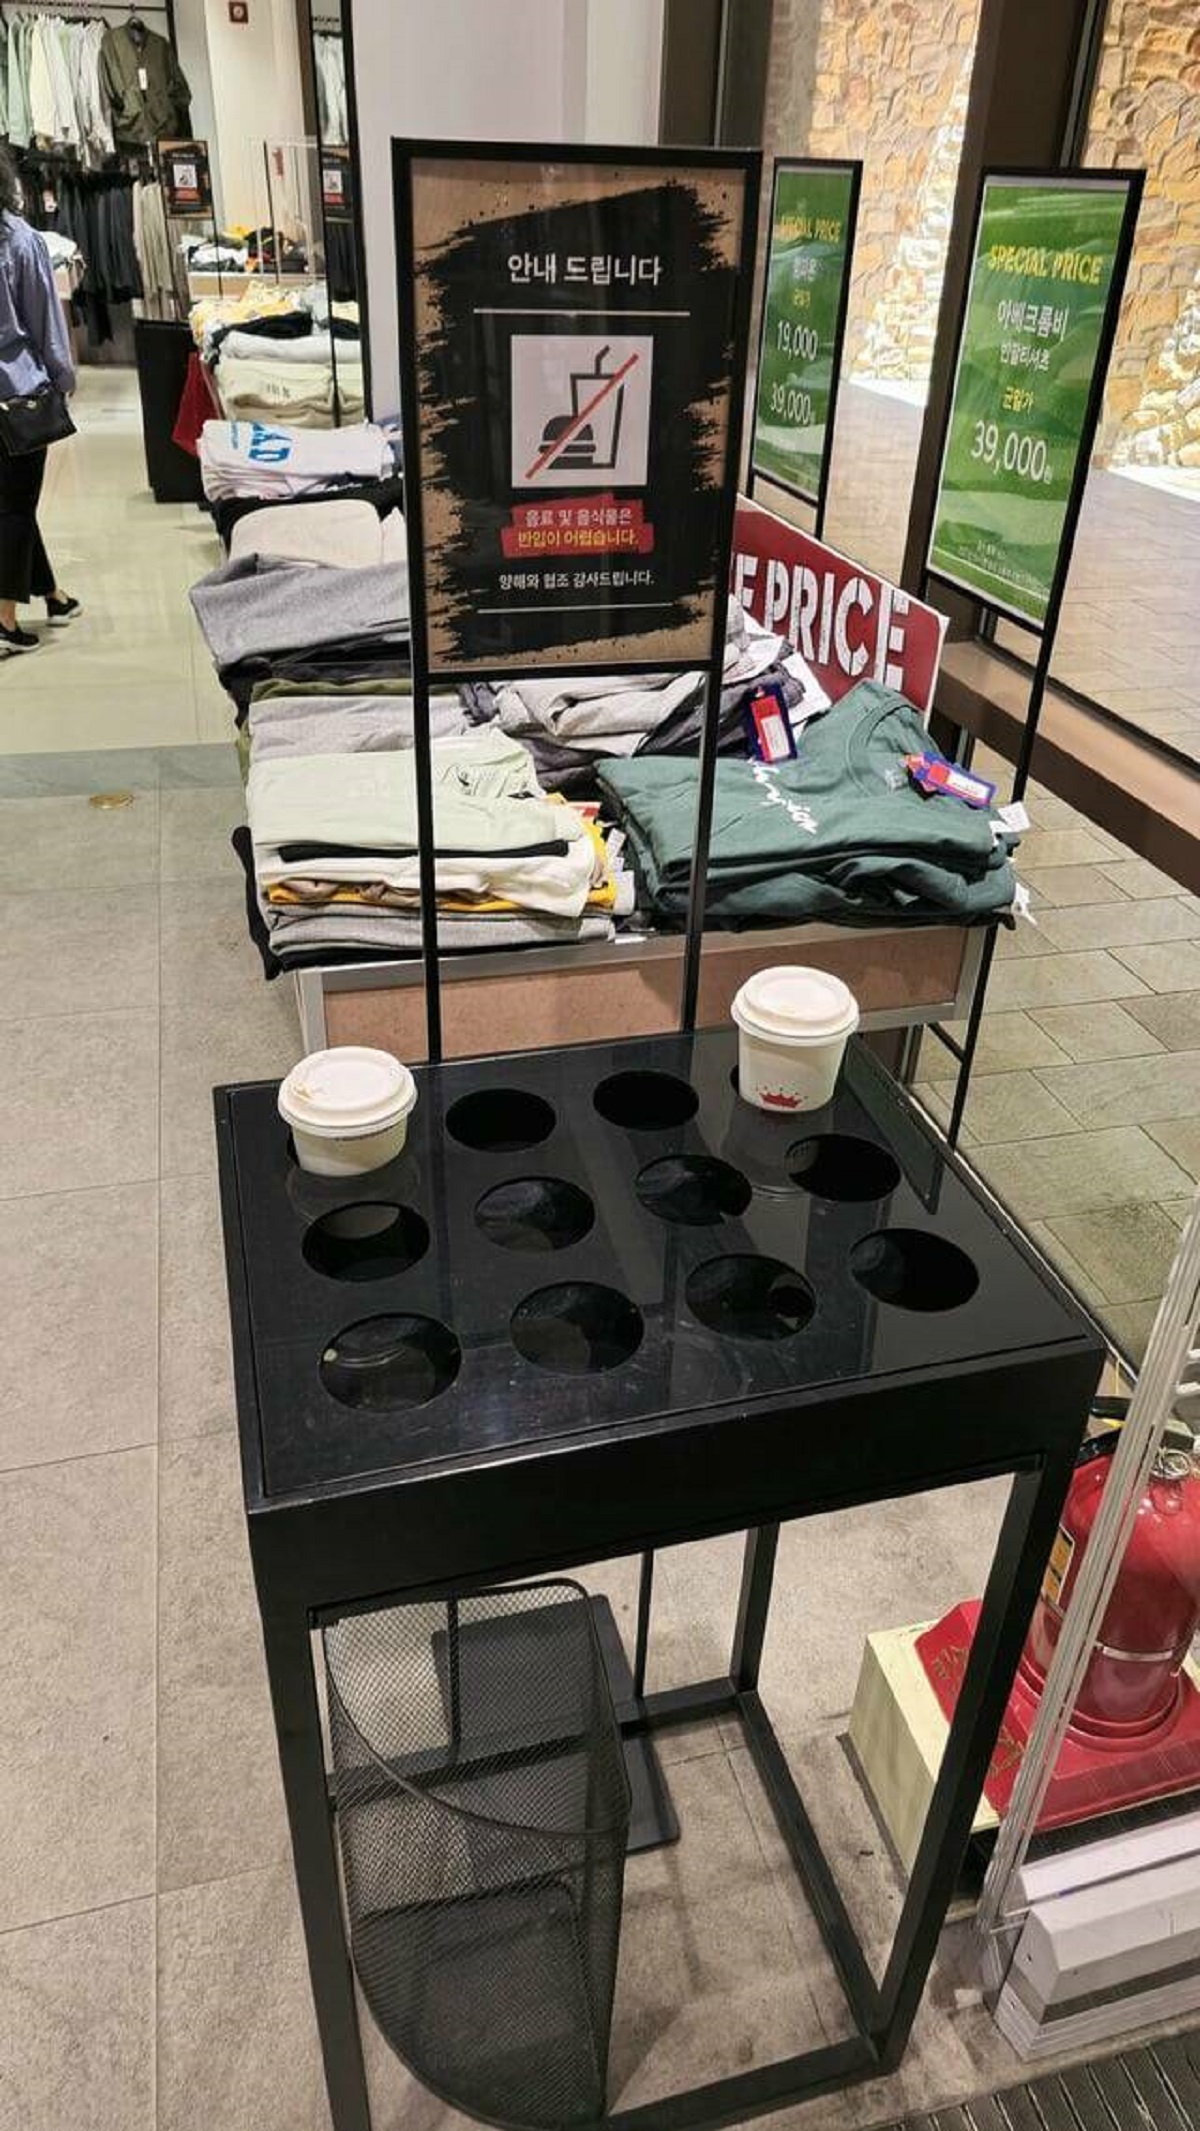 "Some stores in Korea have a spot to leave your coffee so you can browse without carrying it around"